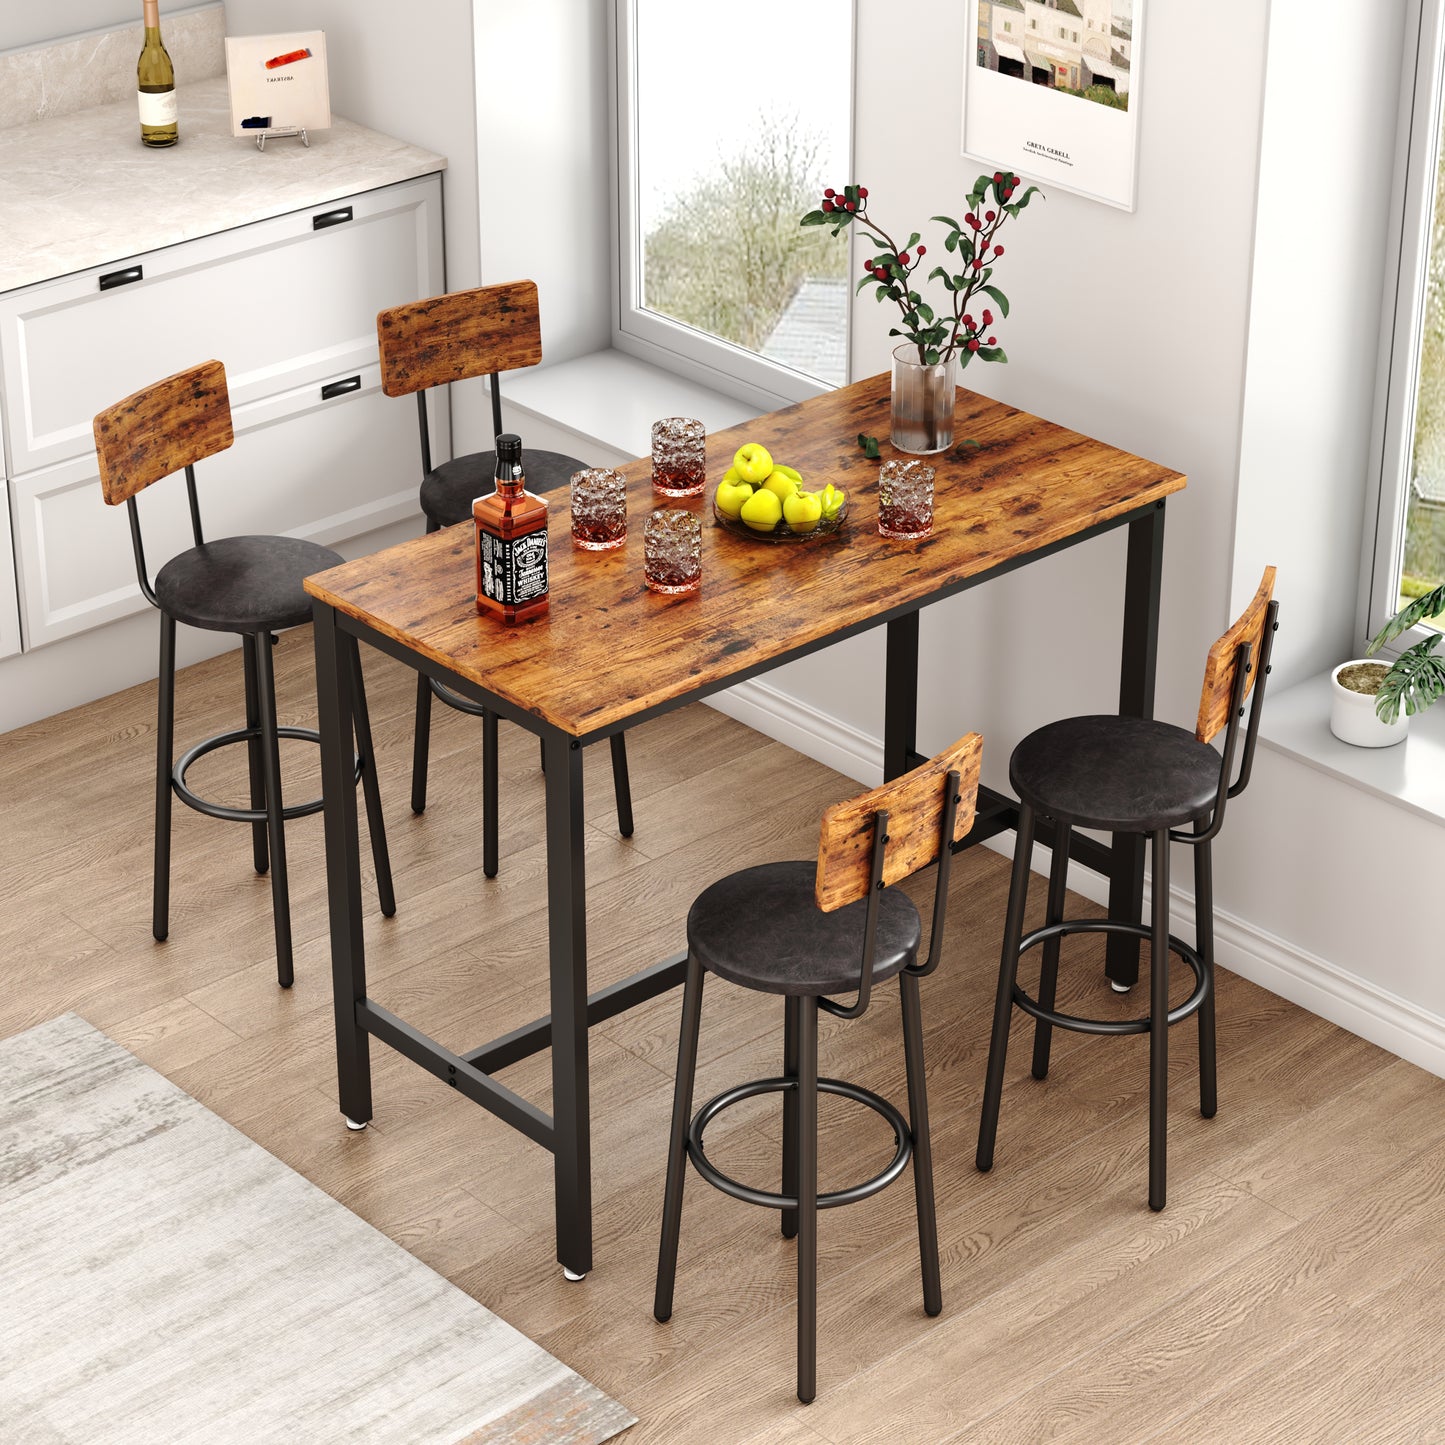 5 Piece Bar Table Set, Modern Counter Height Dining Set, Home Dining Table and Chairs Set for 4, Kitchen Breakfast Table Set with 4 Cushioned Stools, Bistro Pub Table Set, D6424